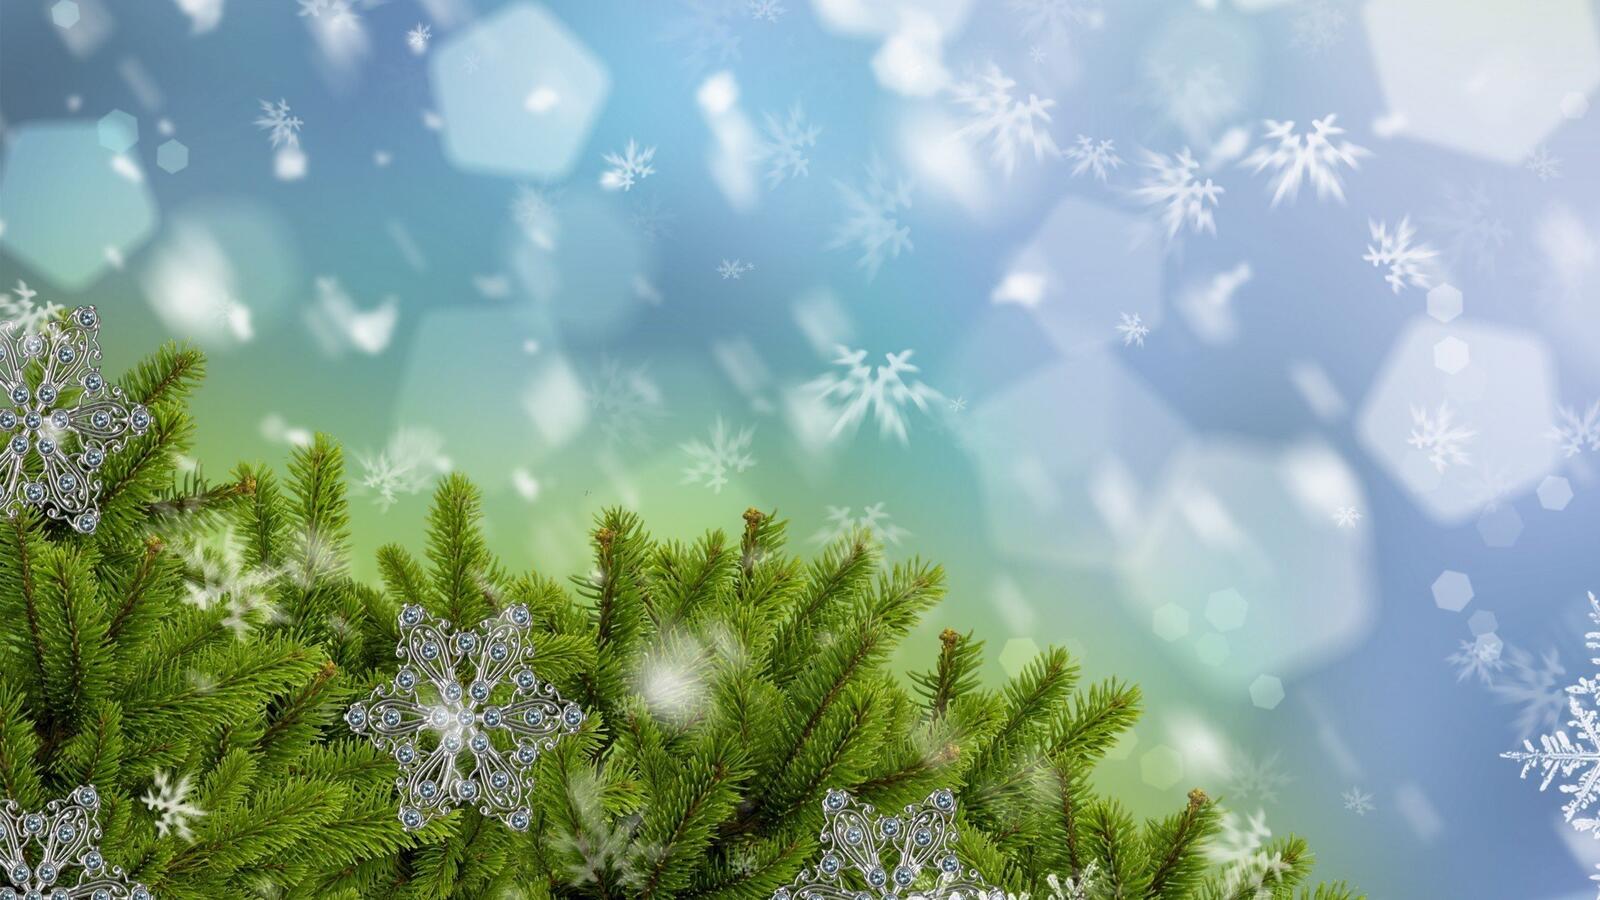 Wallpapers snowflakes winter branch on the desktop